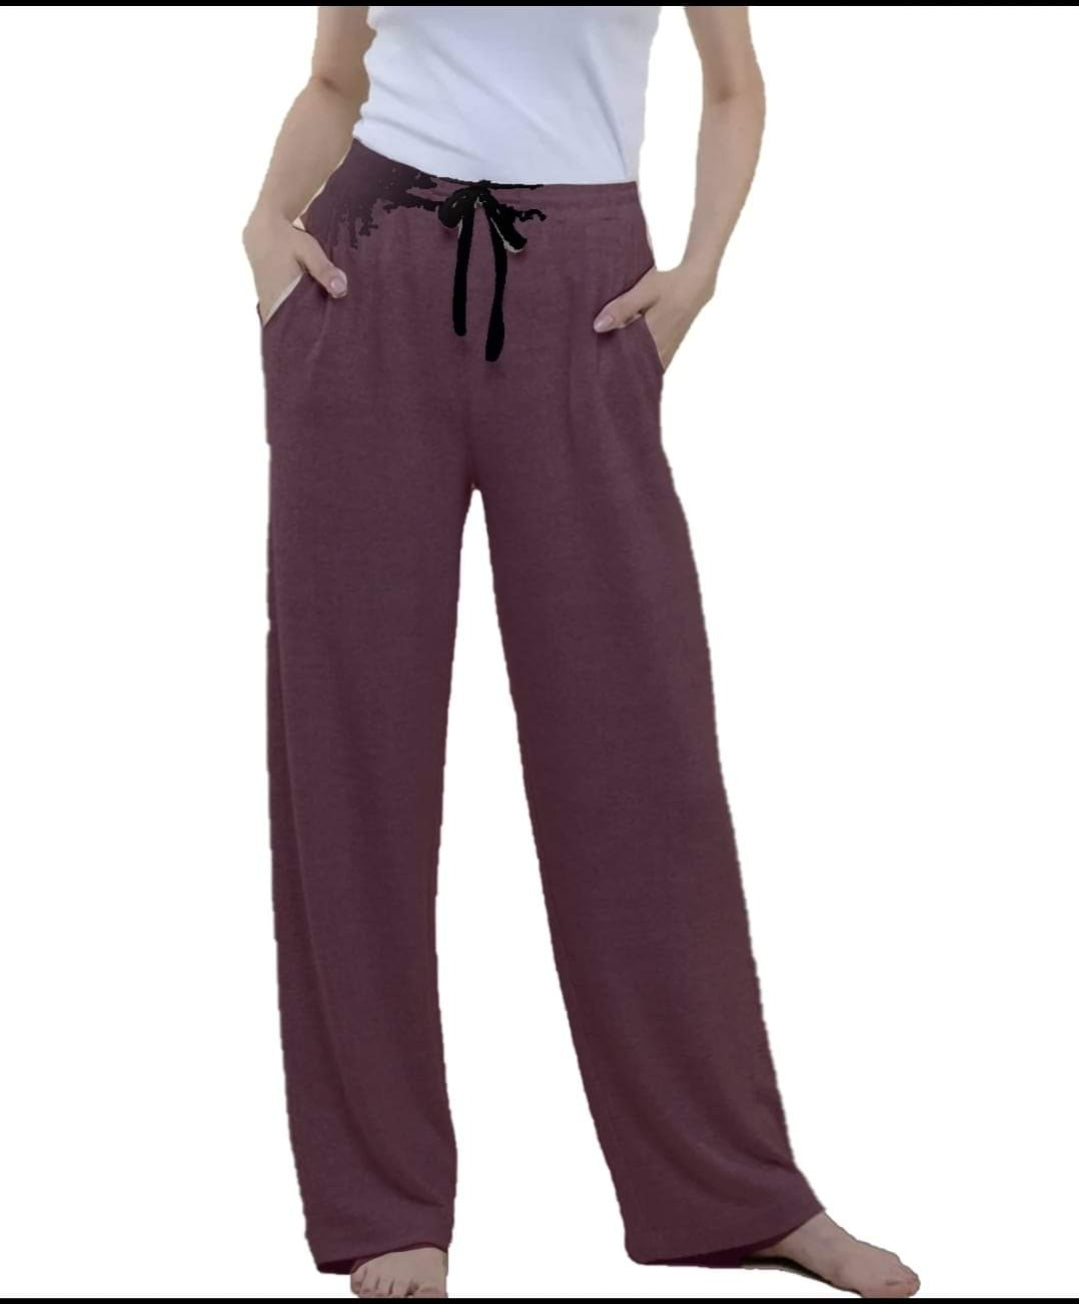 Solid Burgundy Lounge Pants - Smarty Pants Boutique NH